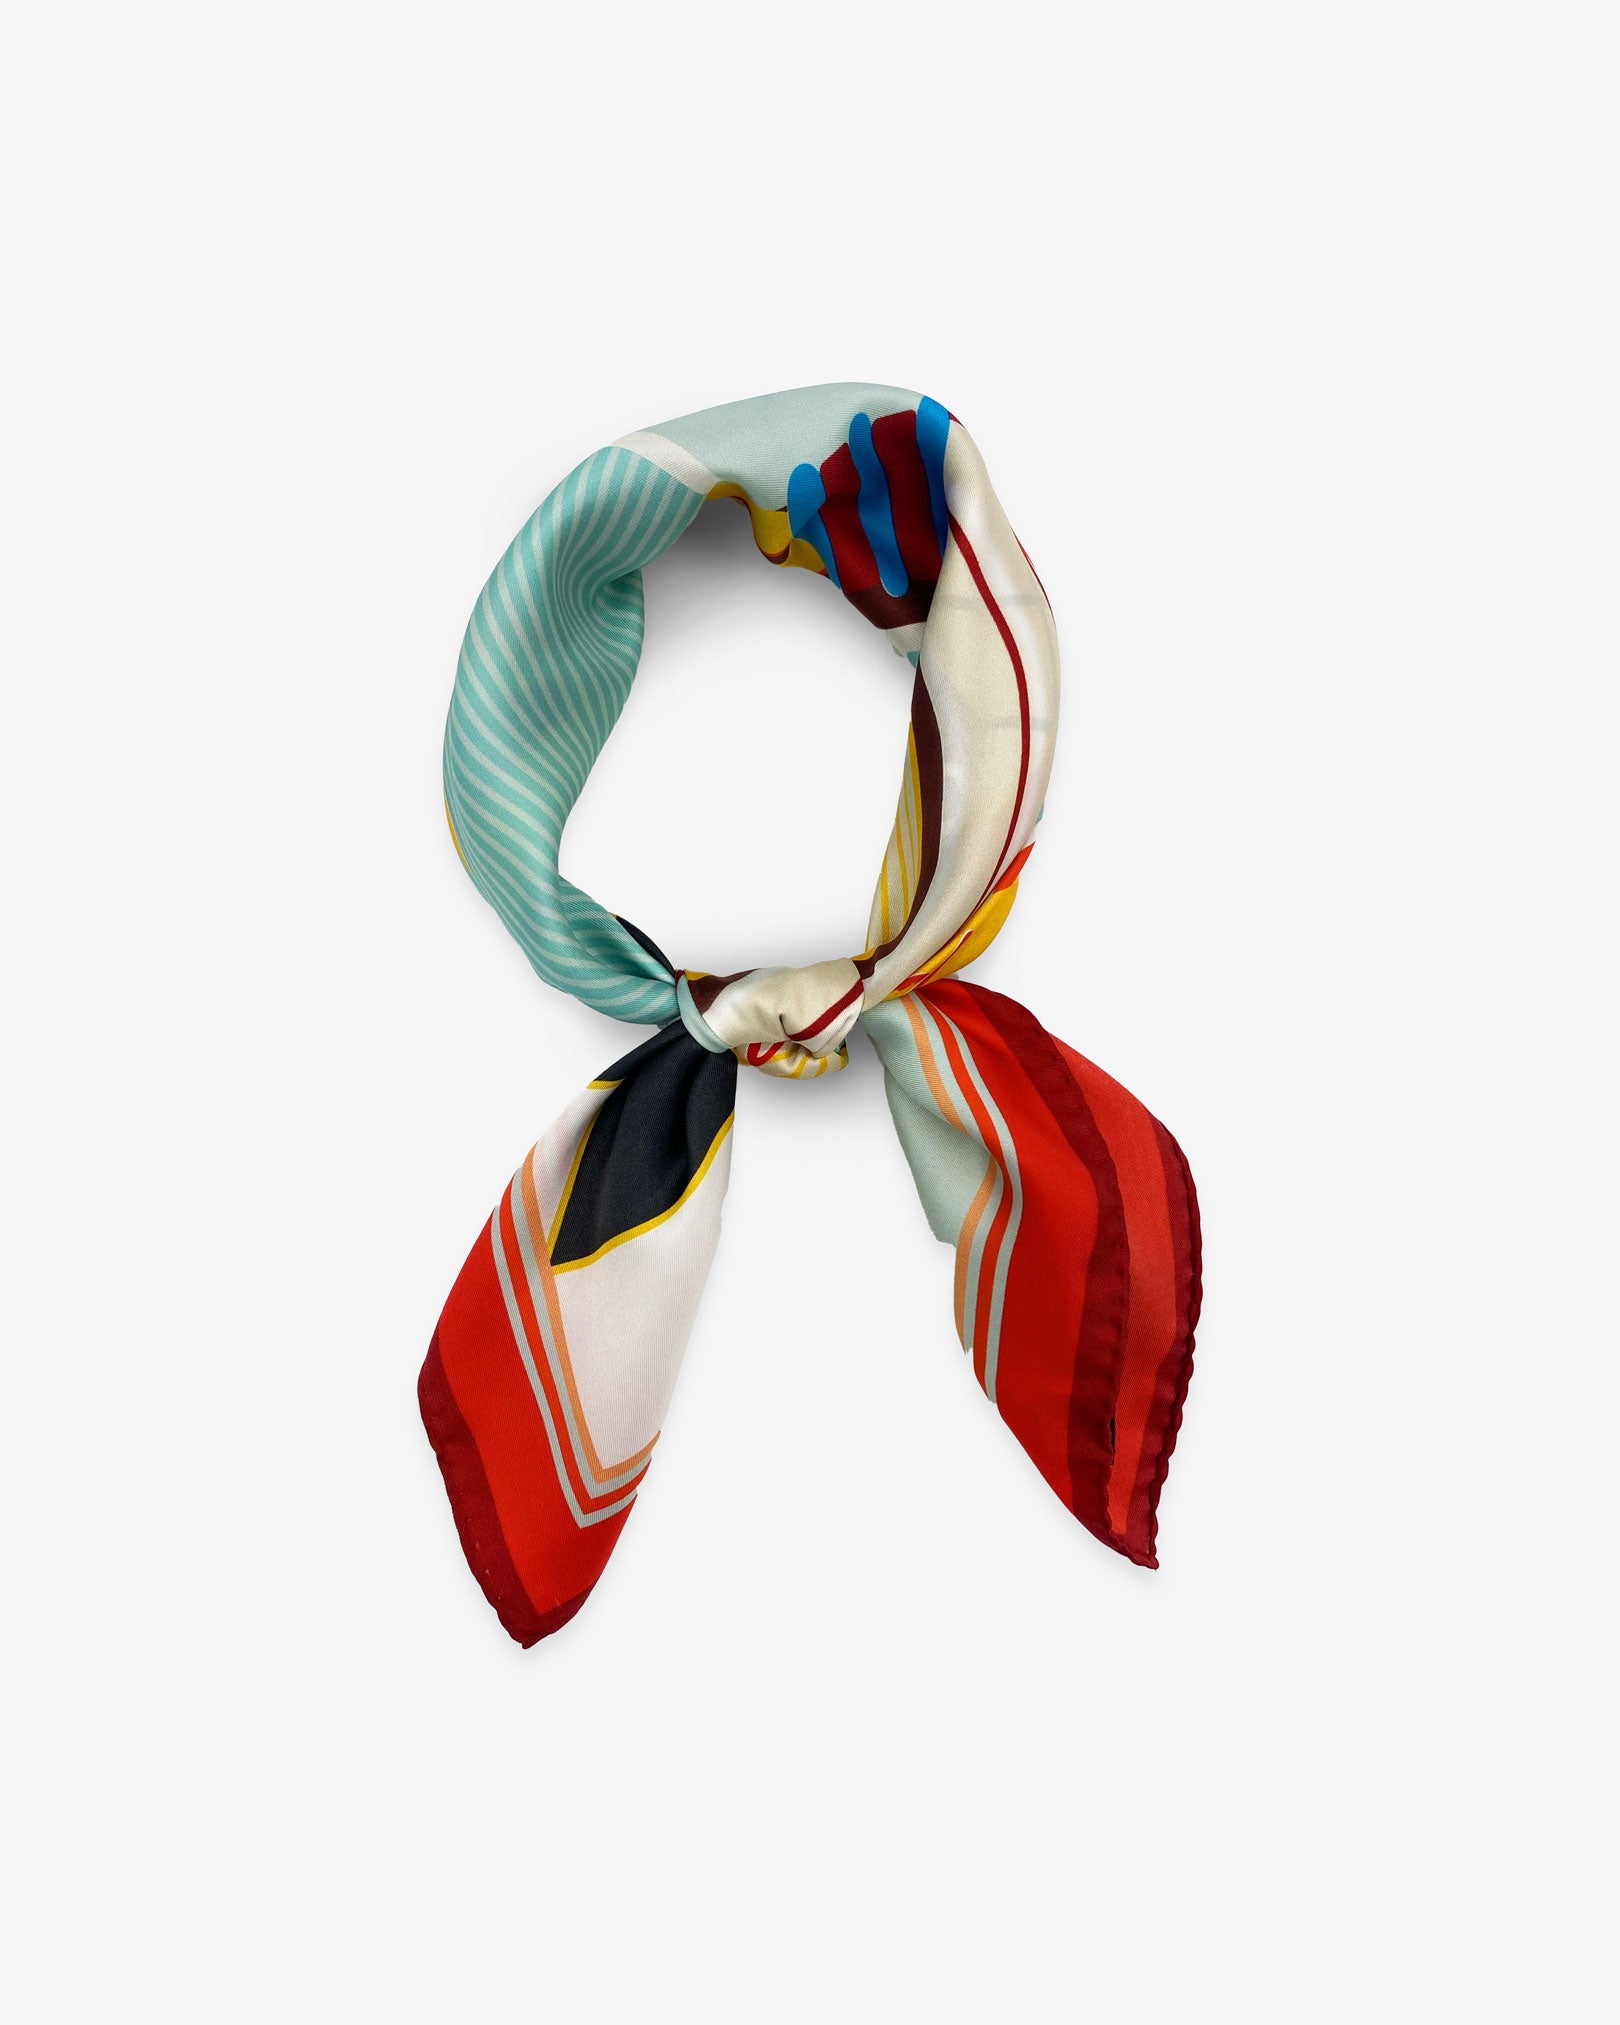 The 'Jukebox 2' silk pocket square from SOHO Scarves knotted and looped against a white background.